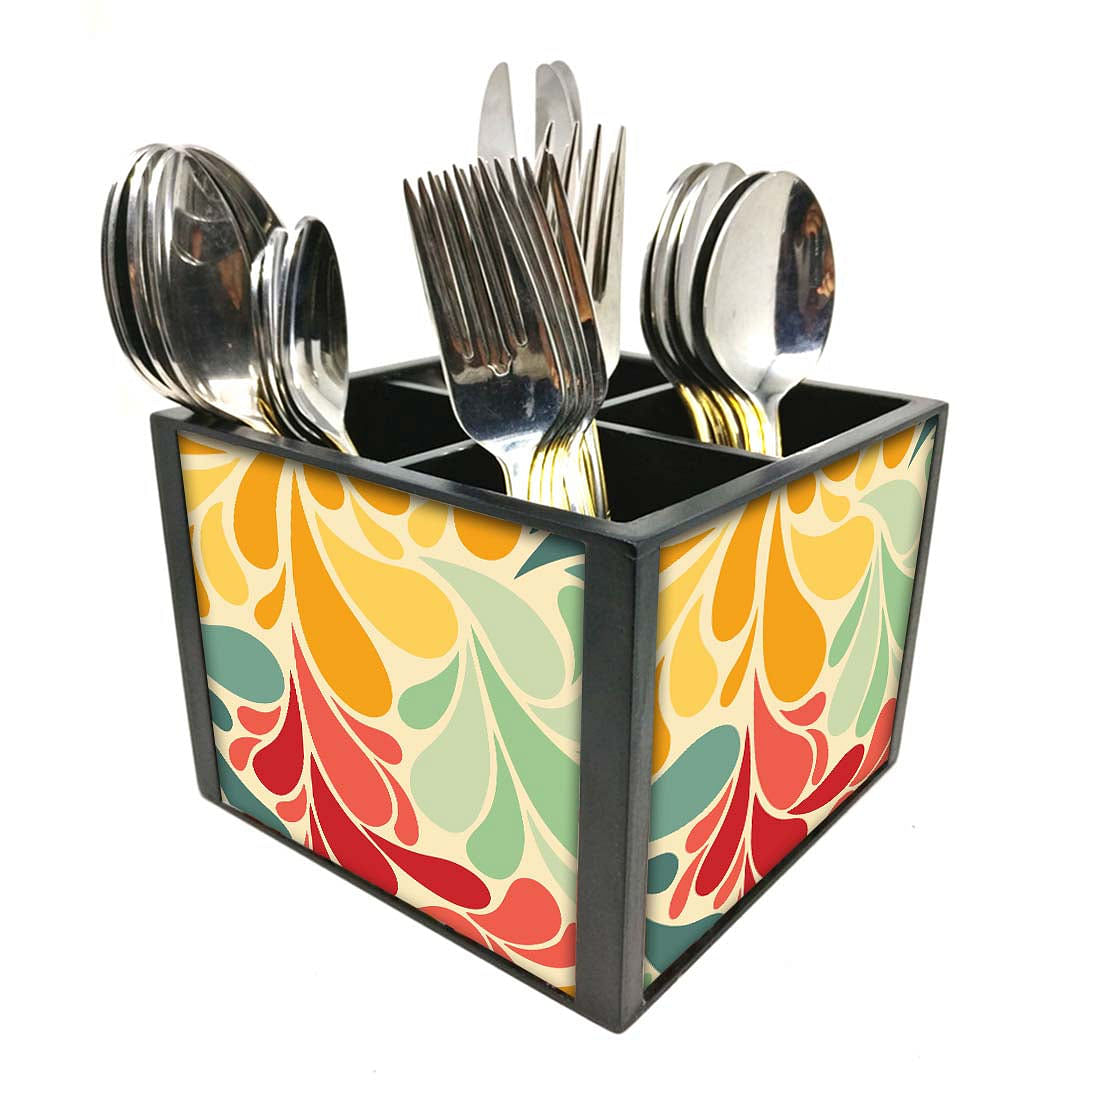 Retro Flower Cutlery Holder Stand Silverware Caddy Organizer for Spoons, Forks & Knives-Made of Pinewood Nutcase